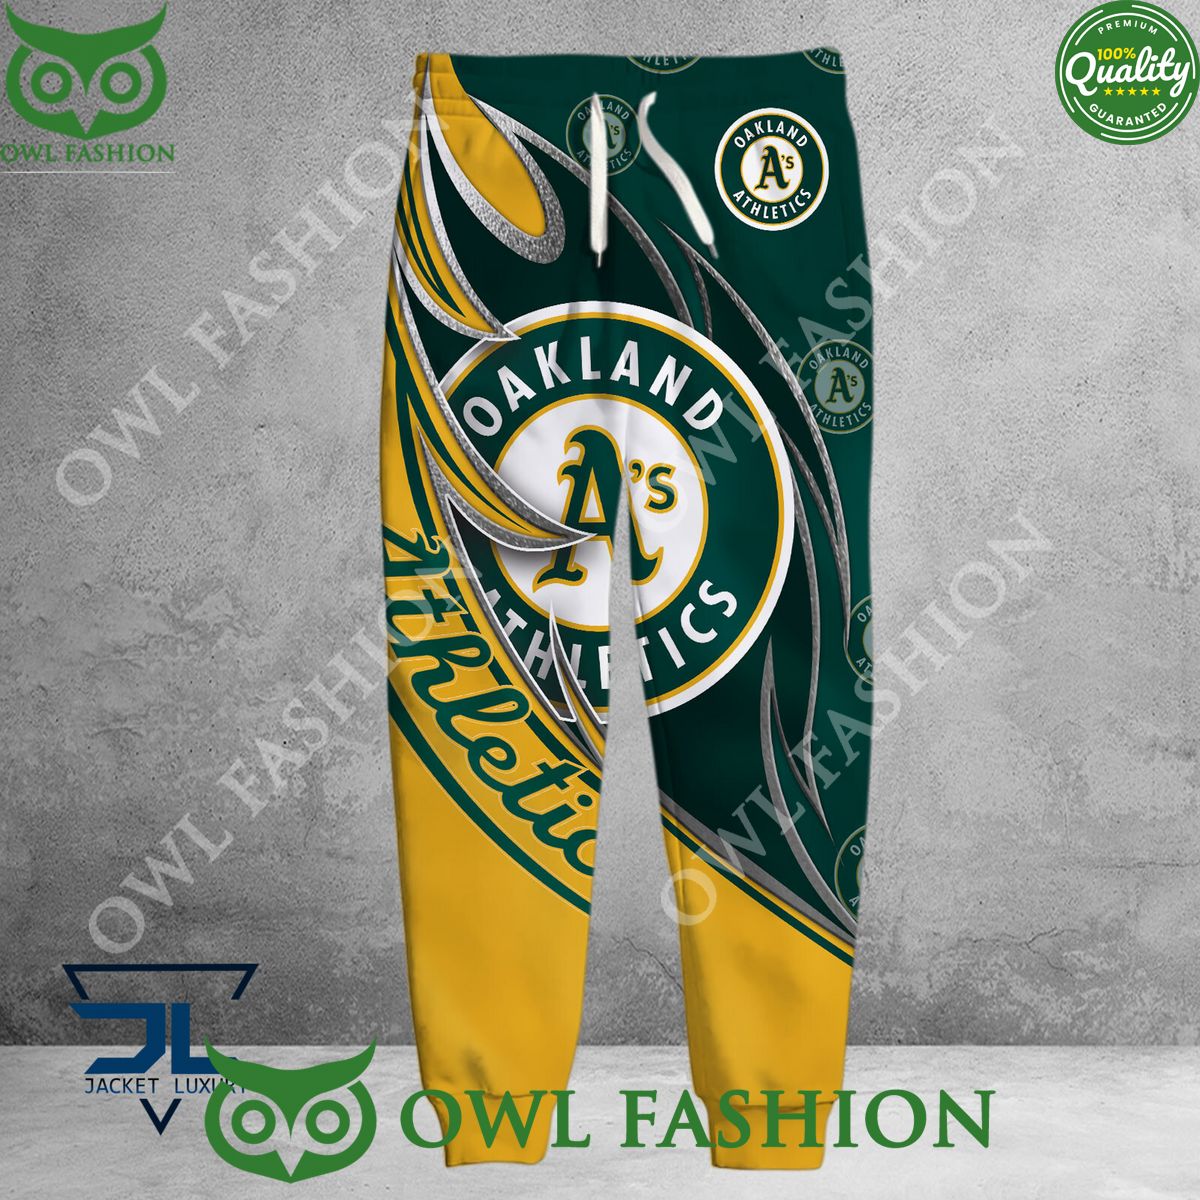 MLB Champion Oakland Athletics Hoodie Shirt Best click of yours